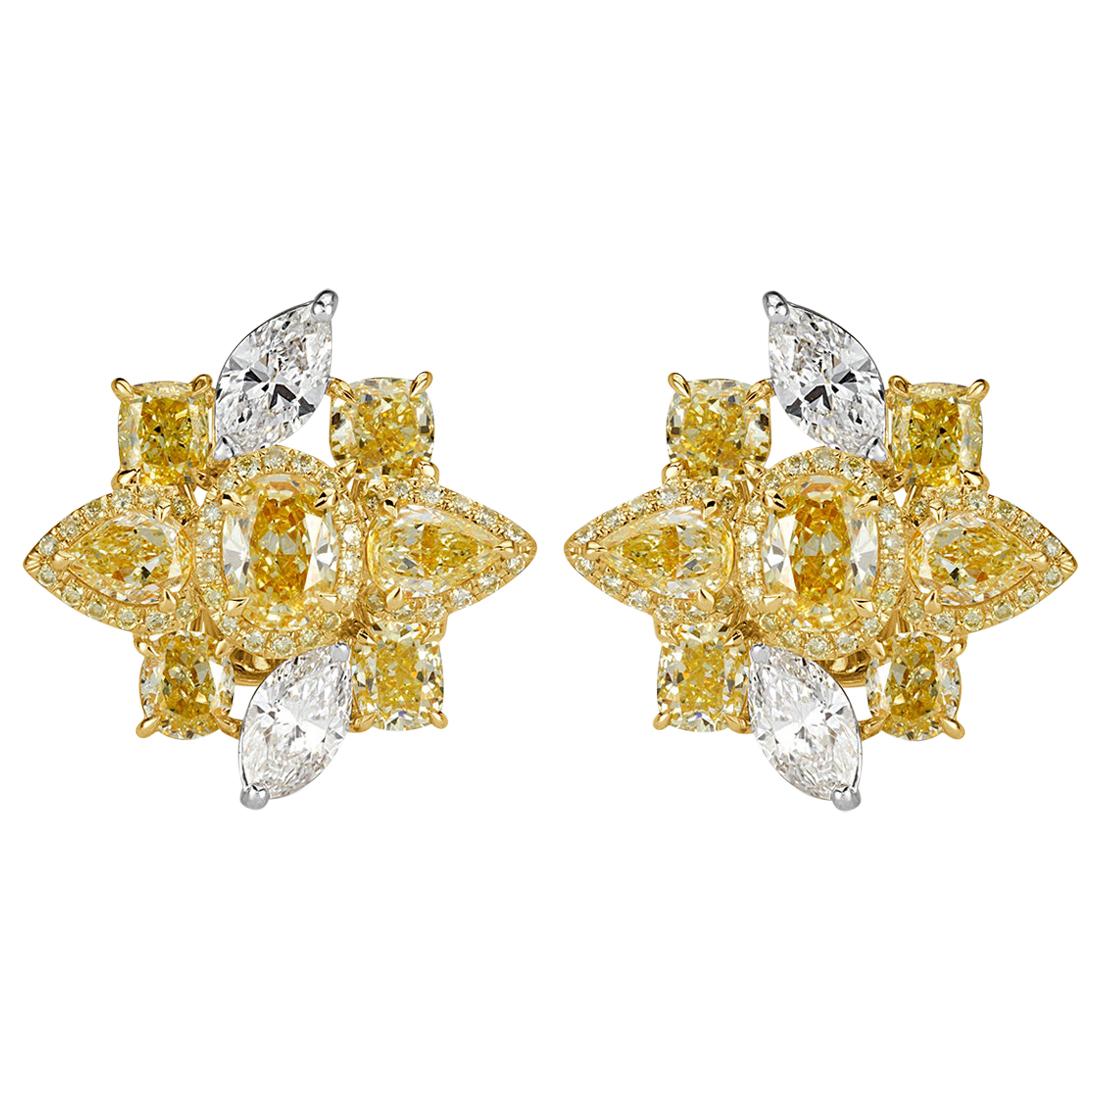 Mark Broumand 5.42 Carat Fancy Yellow and White Diamond Cluster Earrings